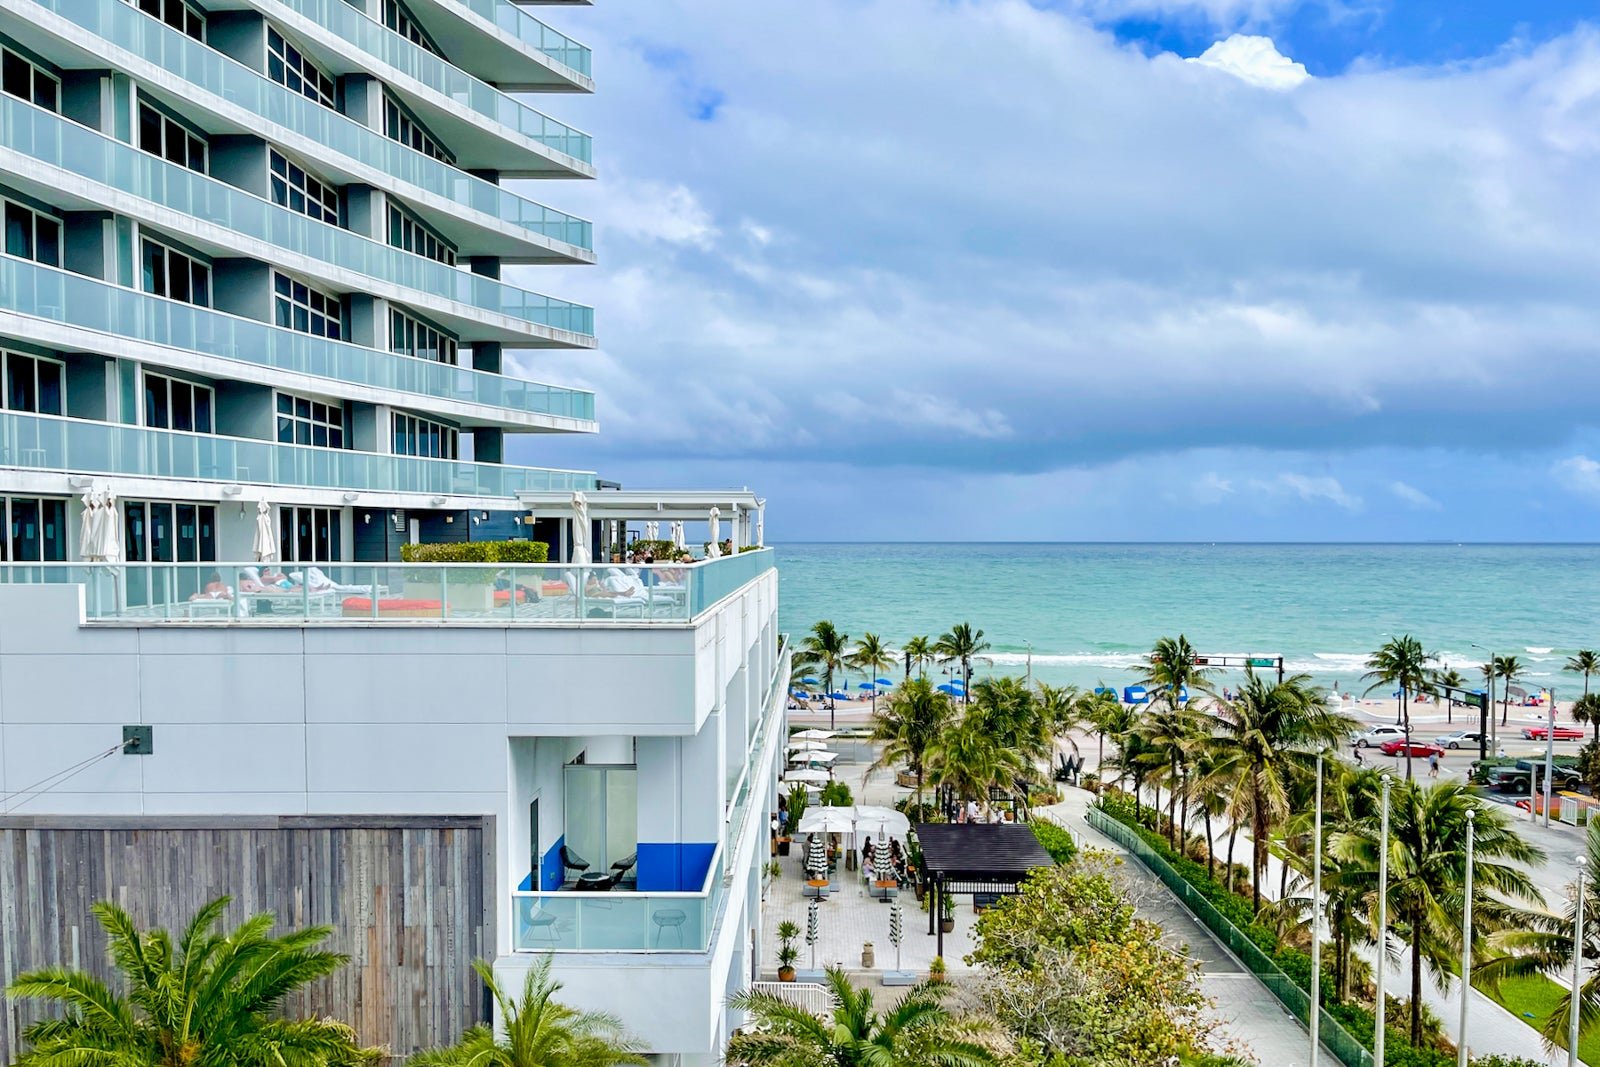 Stylish beachfront getaway: A review of the W Fort Lauderdale